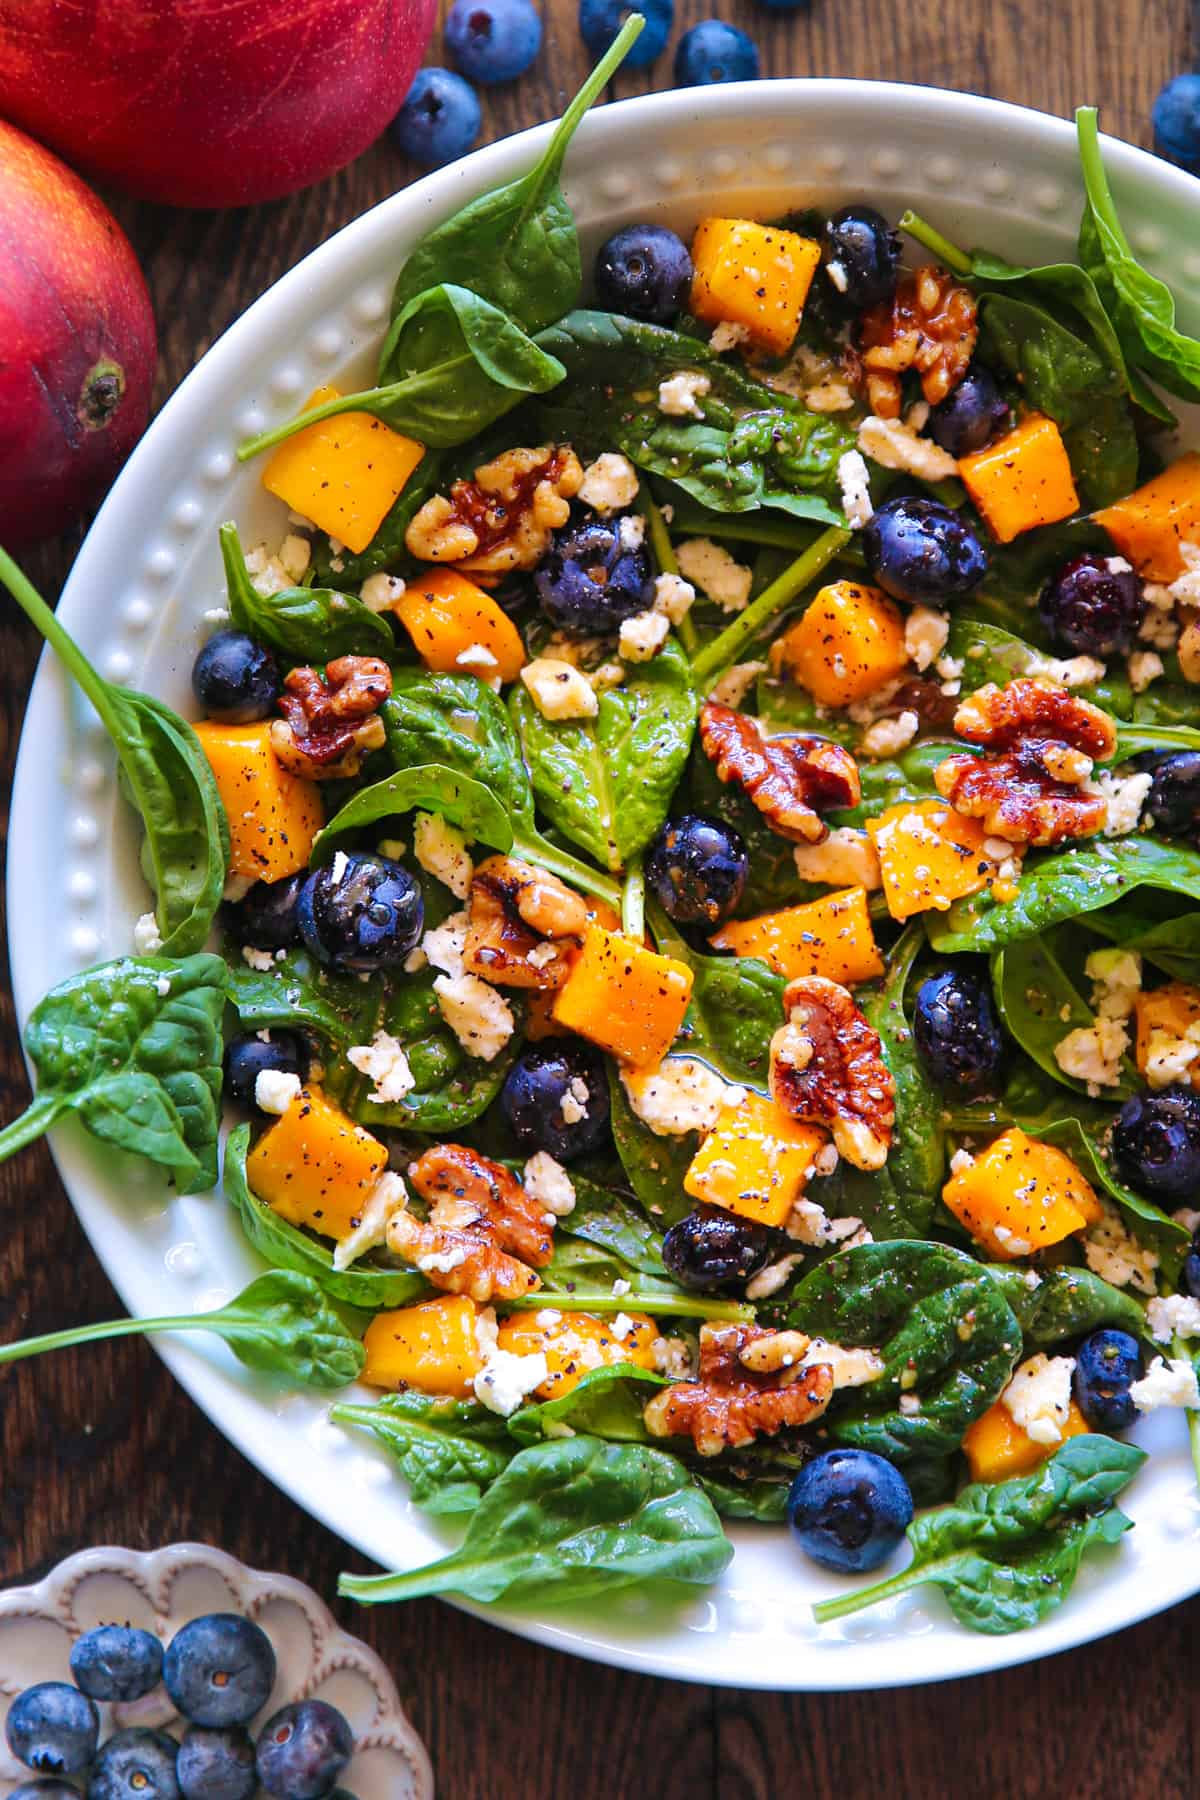 Mango Salad with Spinach, Blueberries, Walnuts, and Feta Cheese - in a white bowl.